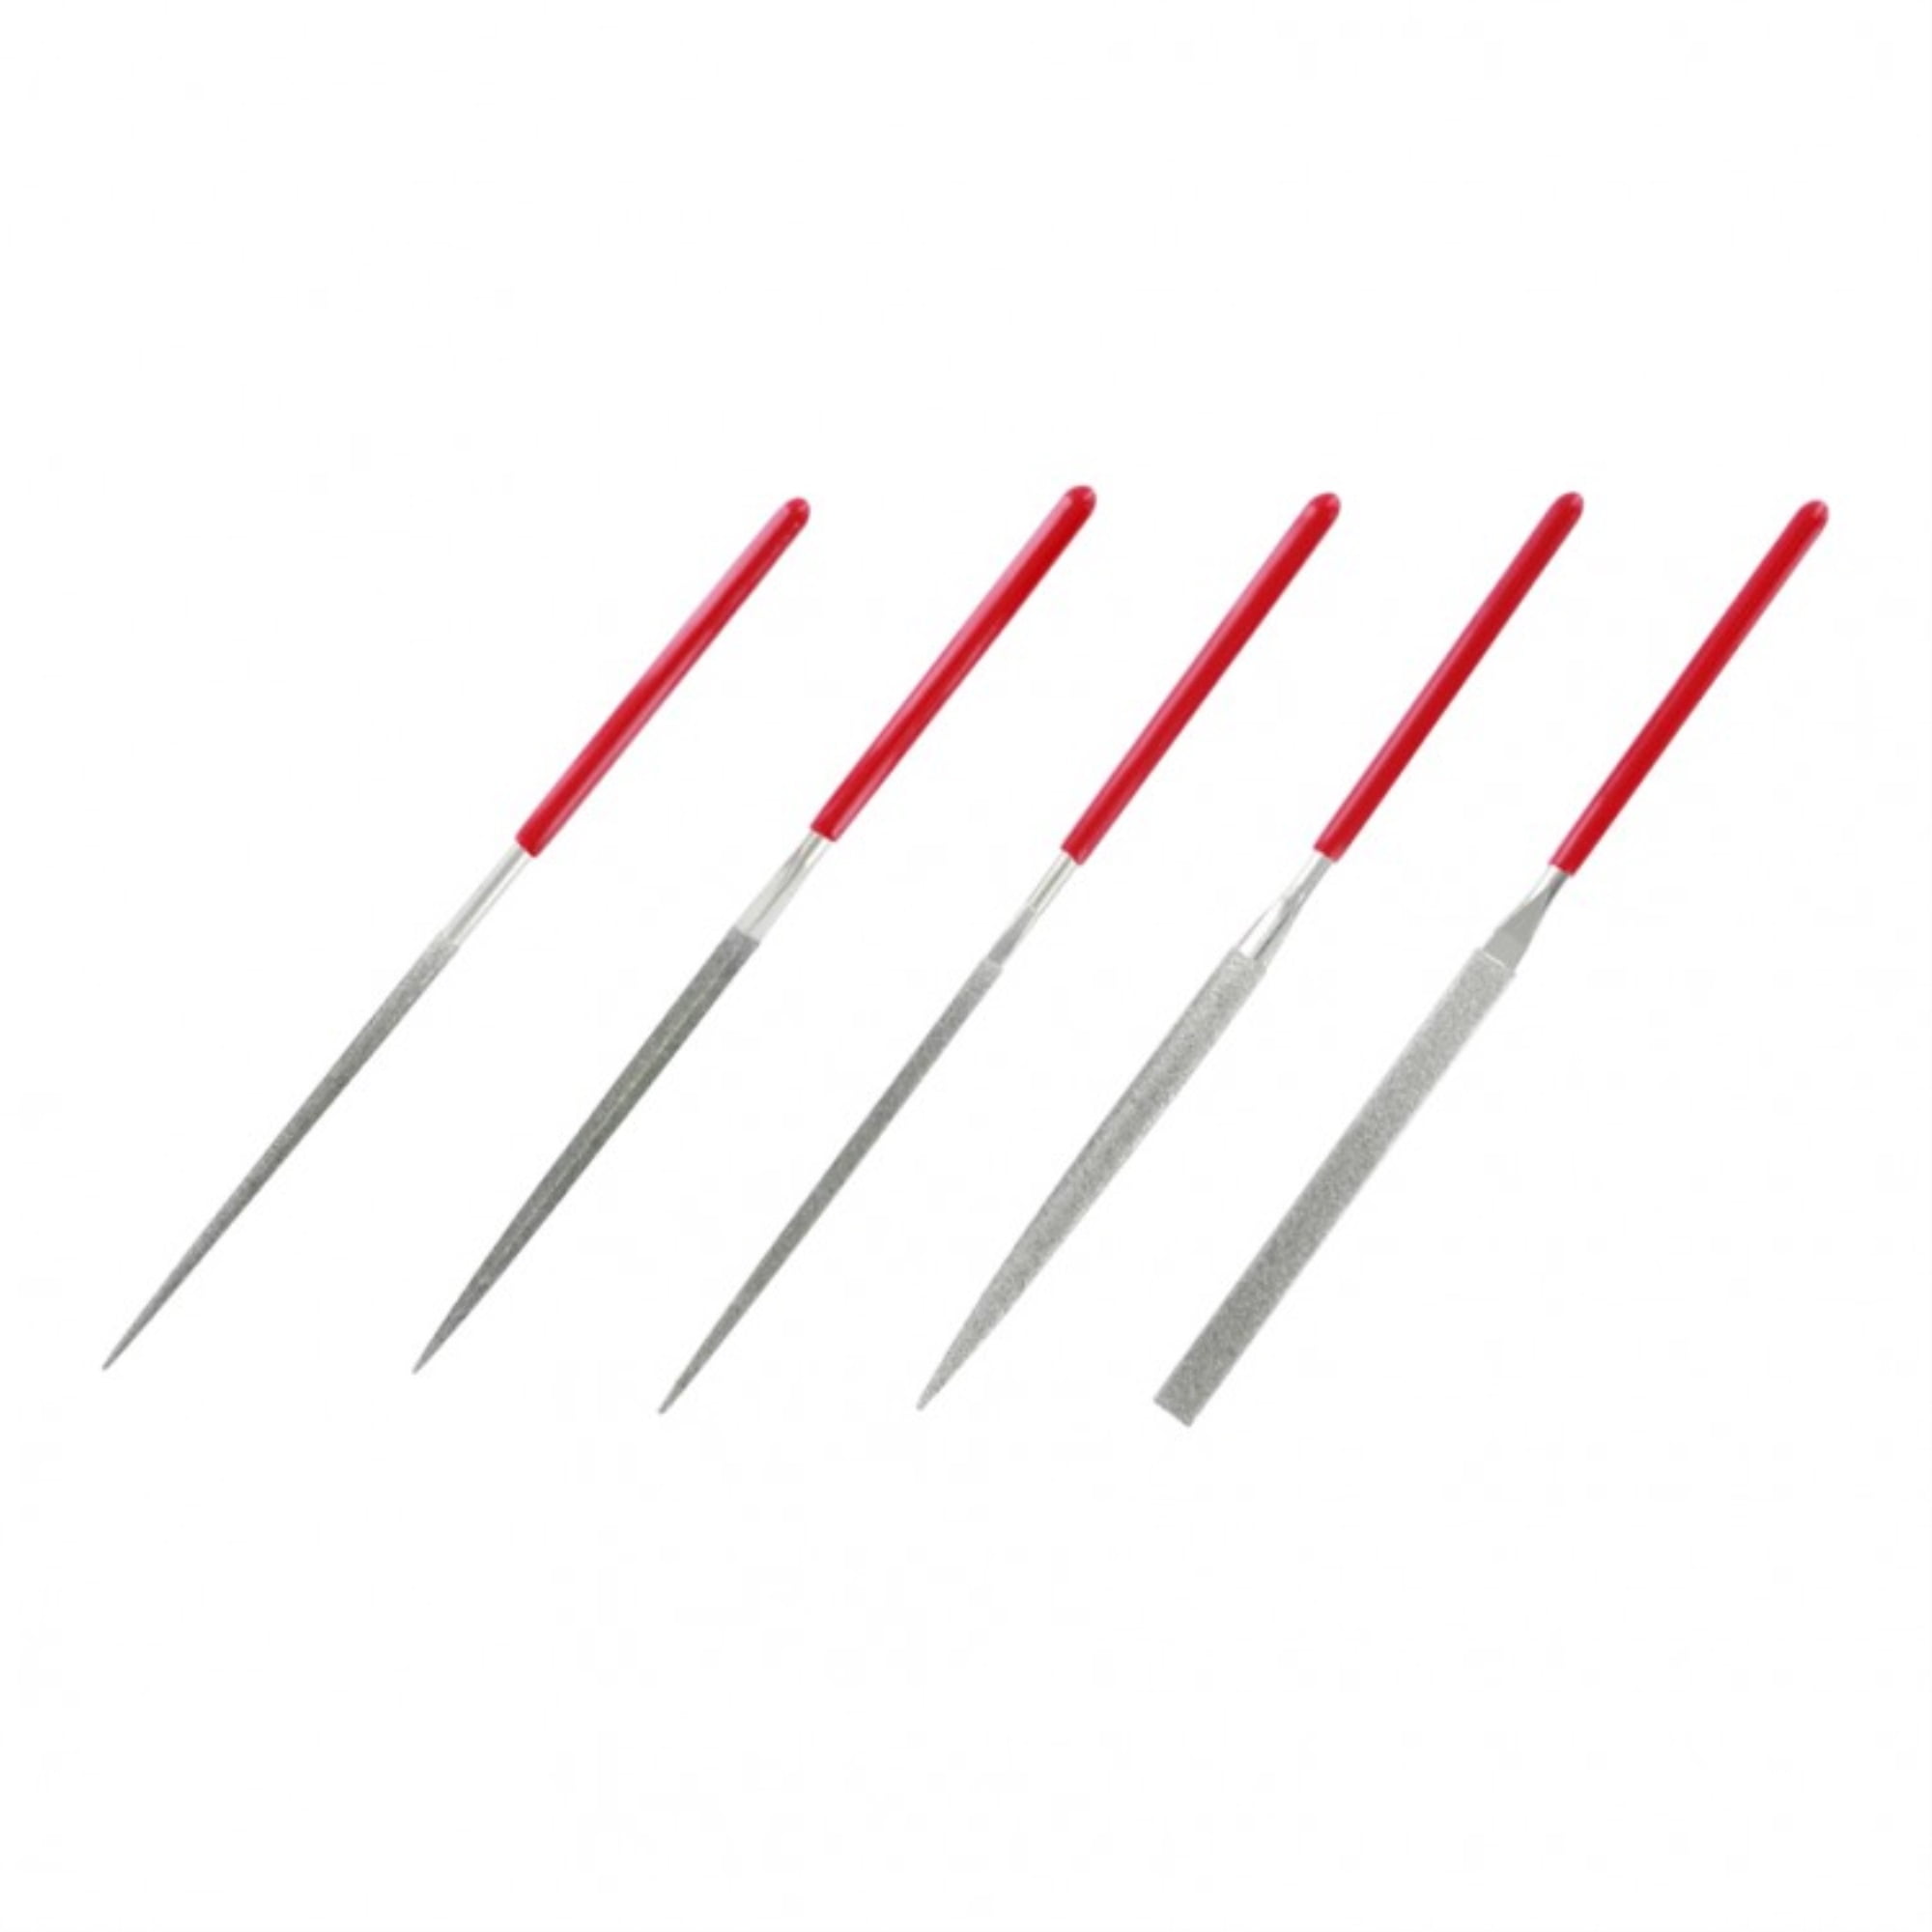 Picture of Acrylicos Vallejo VJP03002 Diamond Needle File set - Pack of 5